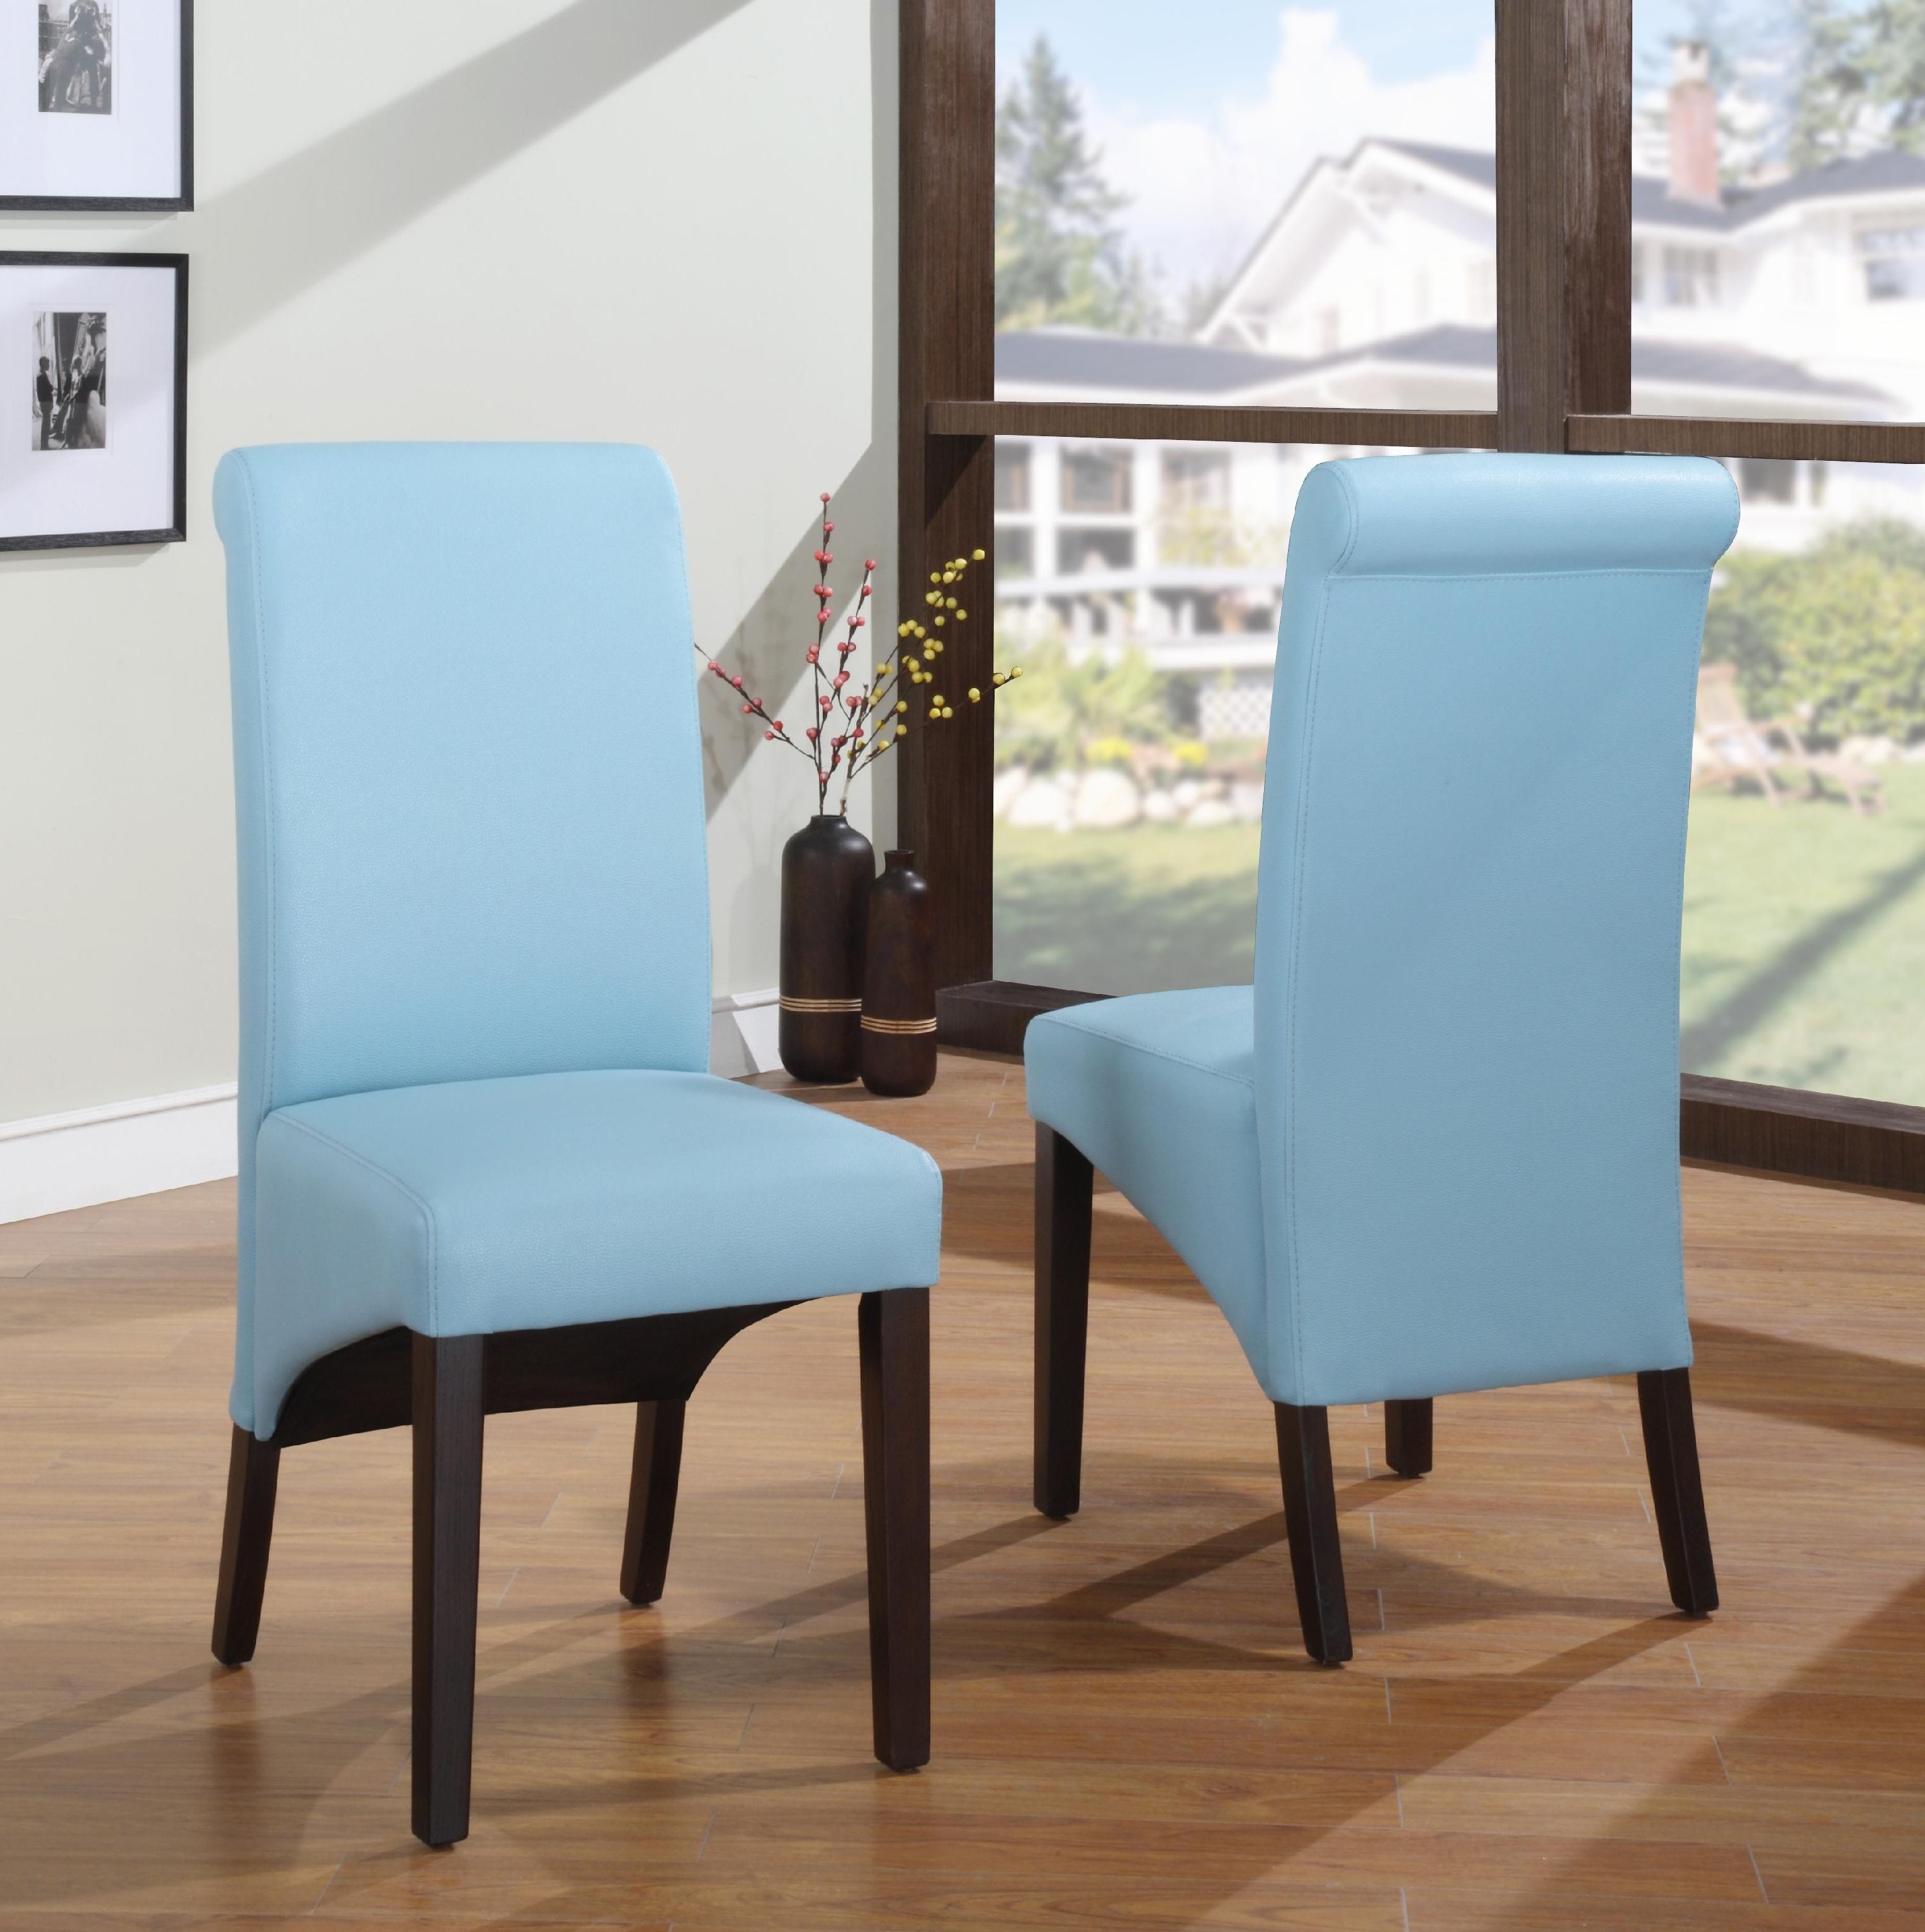 Fmg Within Well Liked Moda Blue Side Chairs (View 8 of 20)